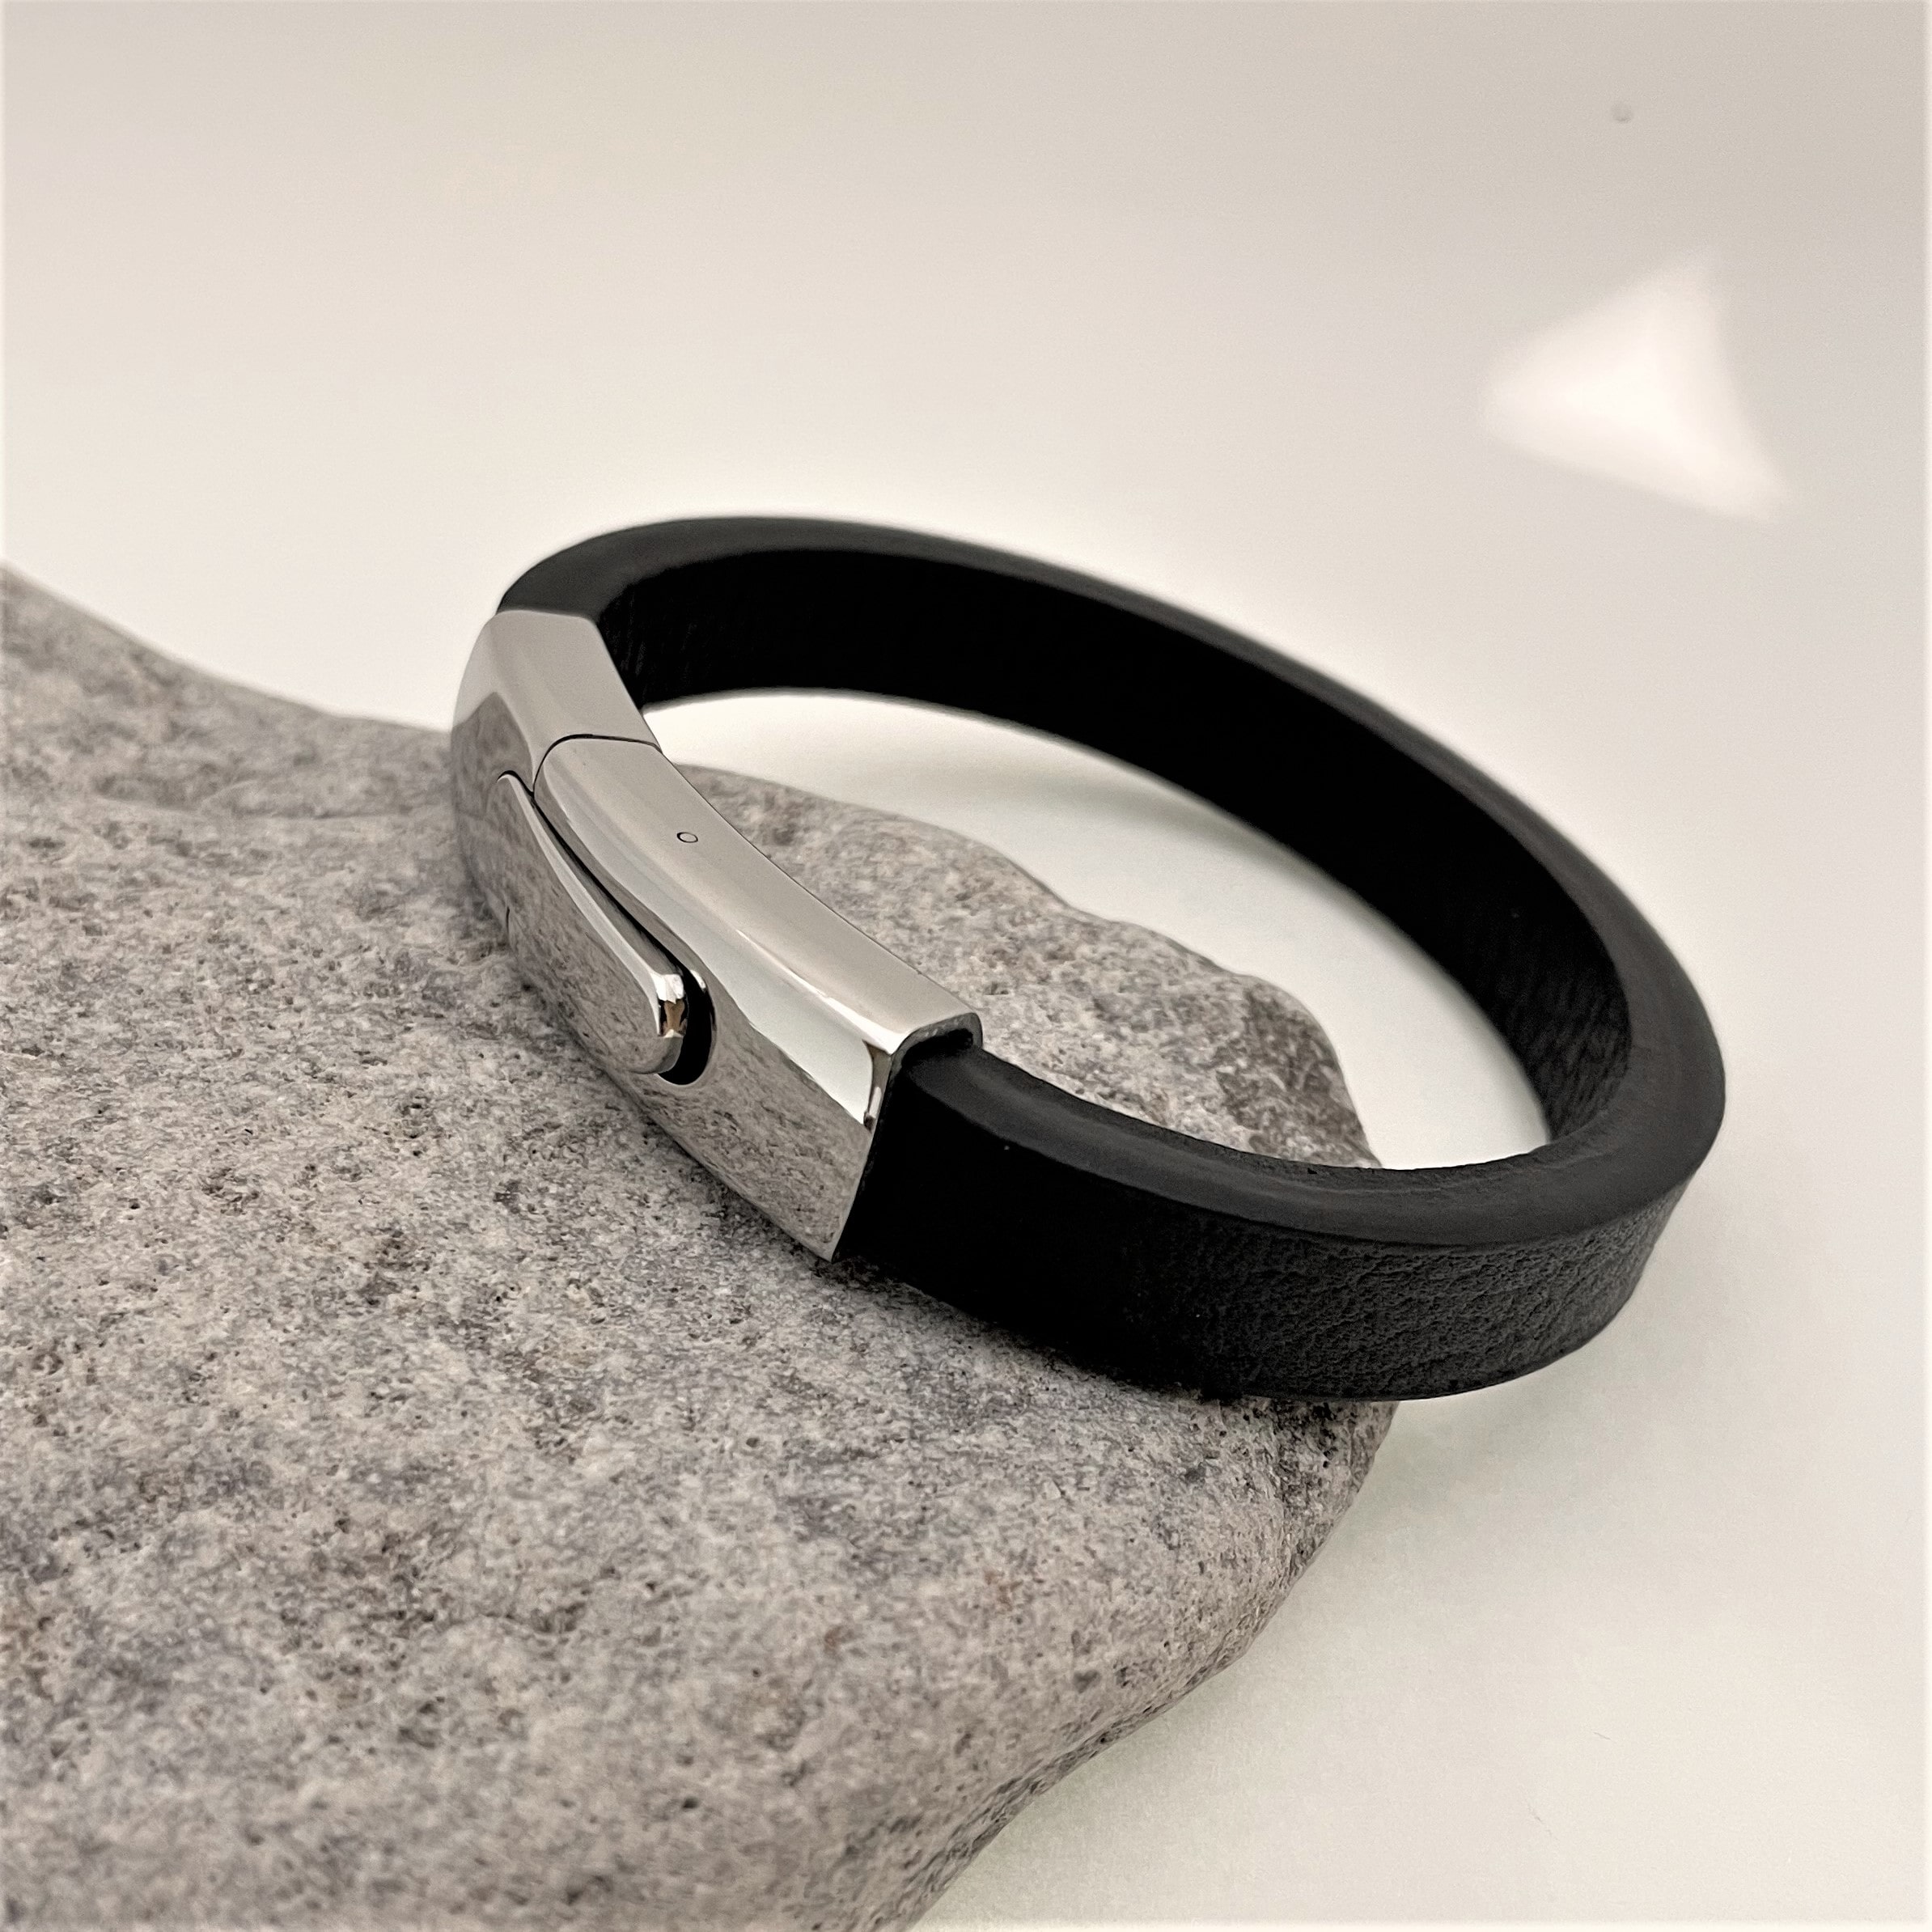 Leather and Steel Bracelet